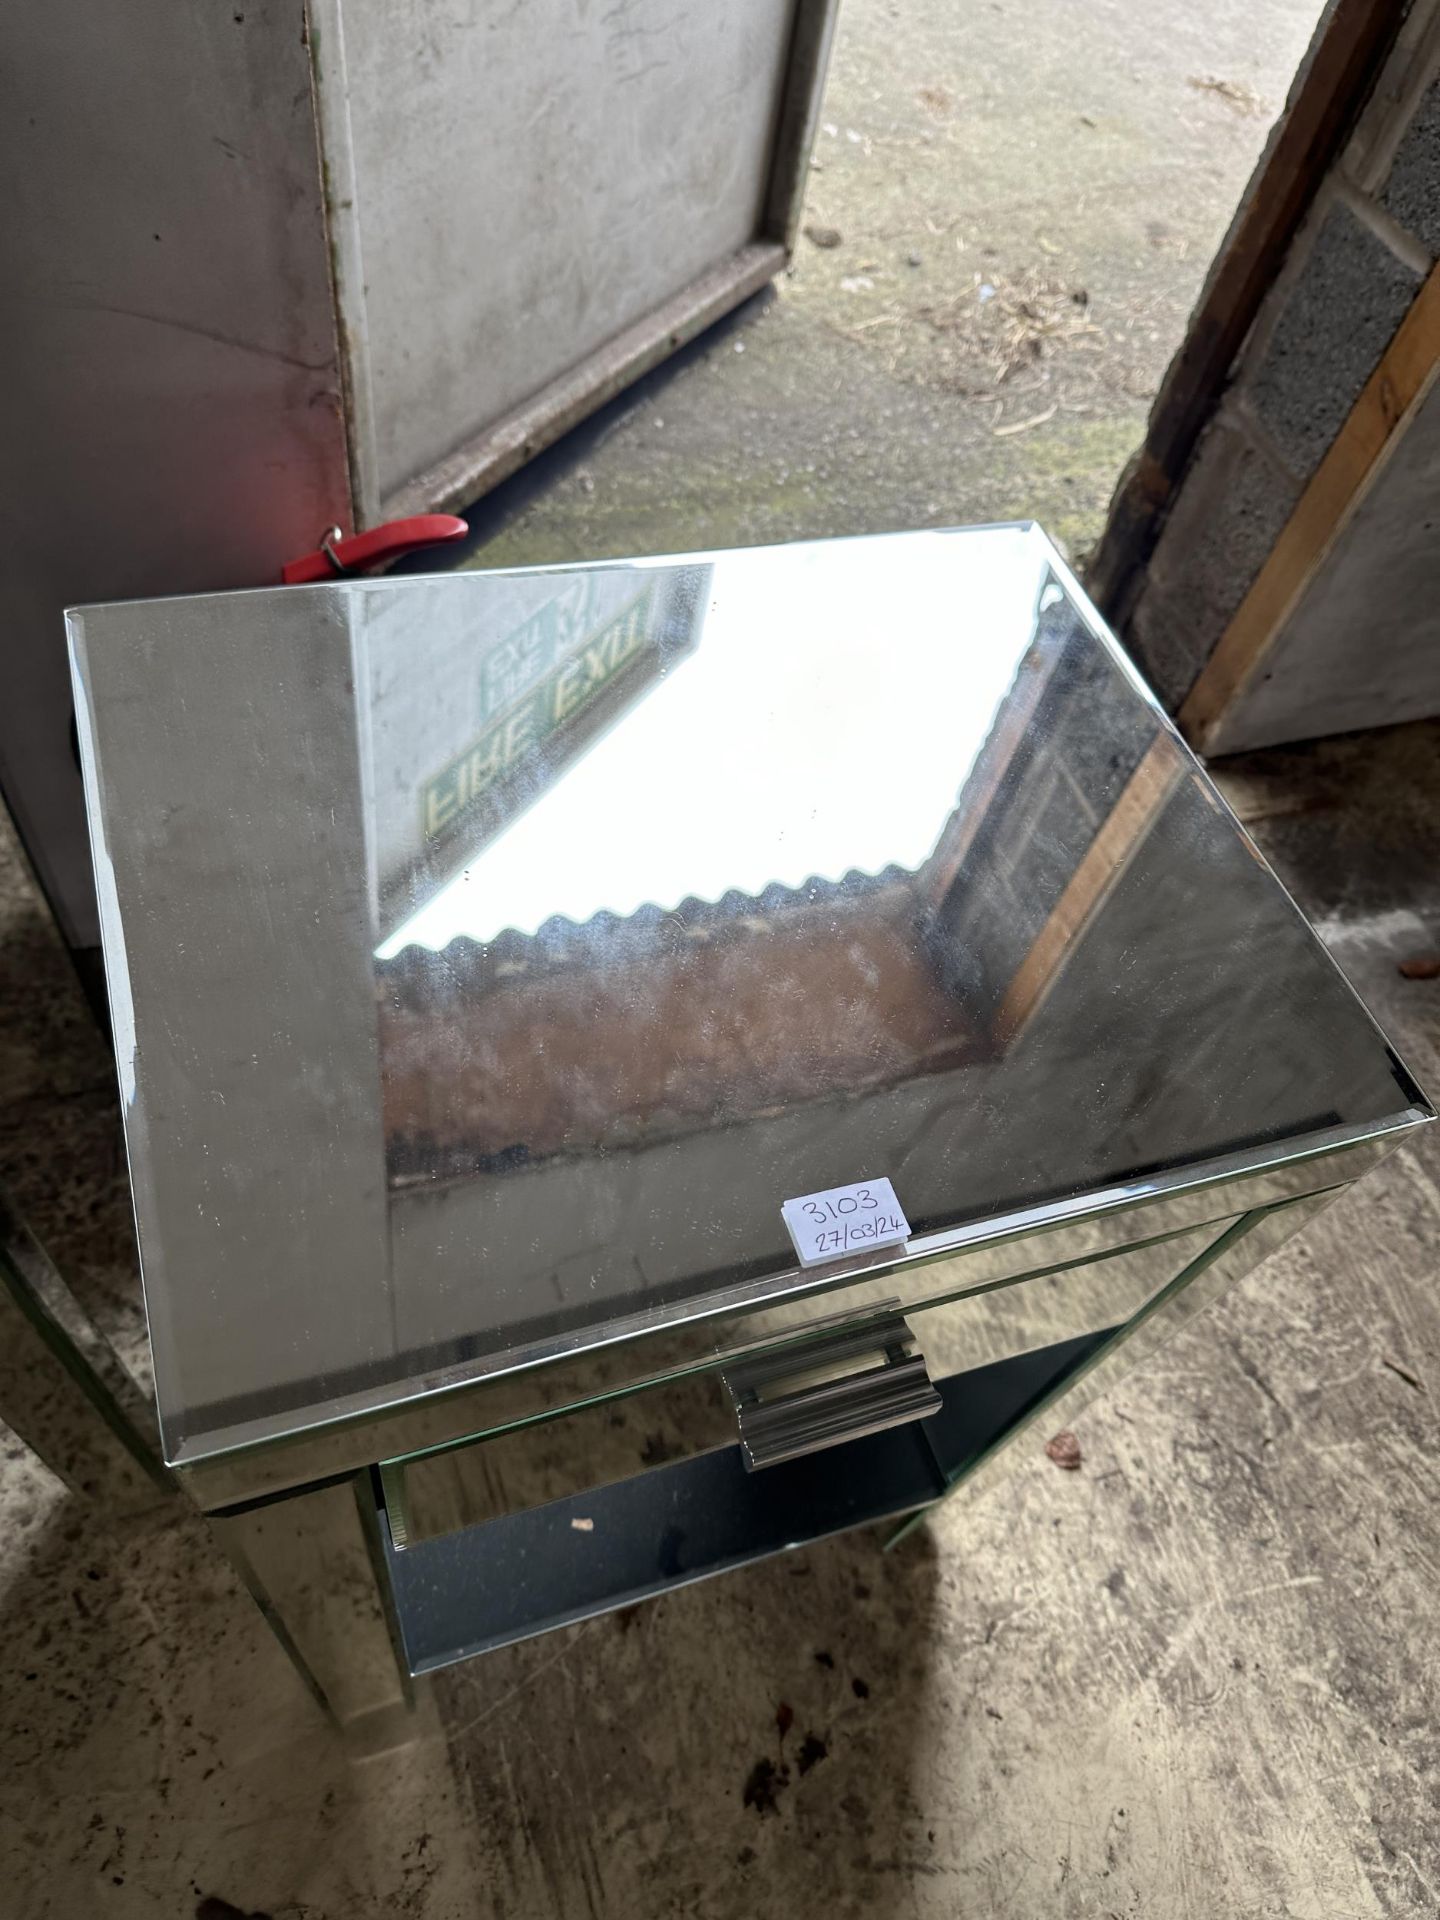 A MIRRORED BEDSIDE CABINET WITH SINGLE DRAWER (FROM A DEVELOPER'S SHOW HOME - BELIEVED UNUSED) - Image 2 of 3